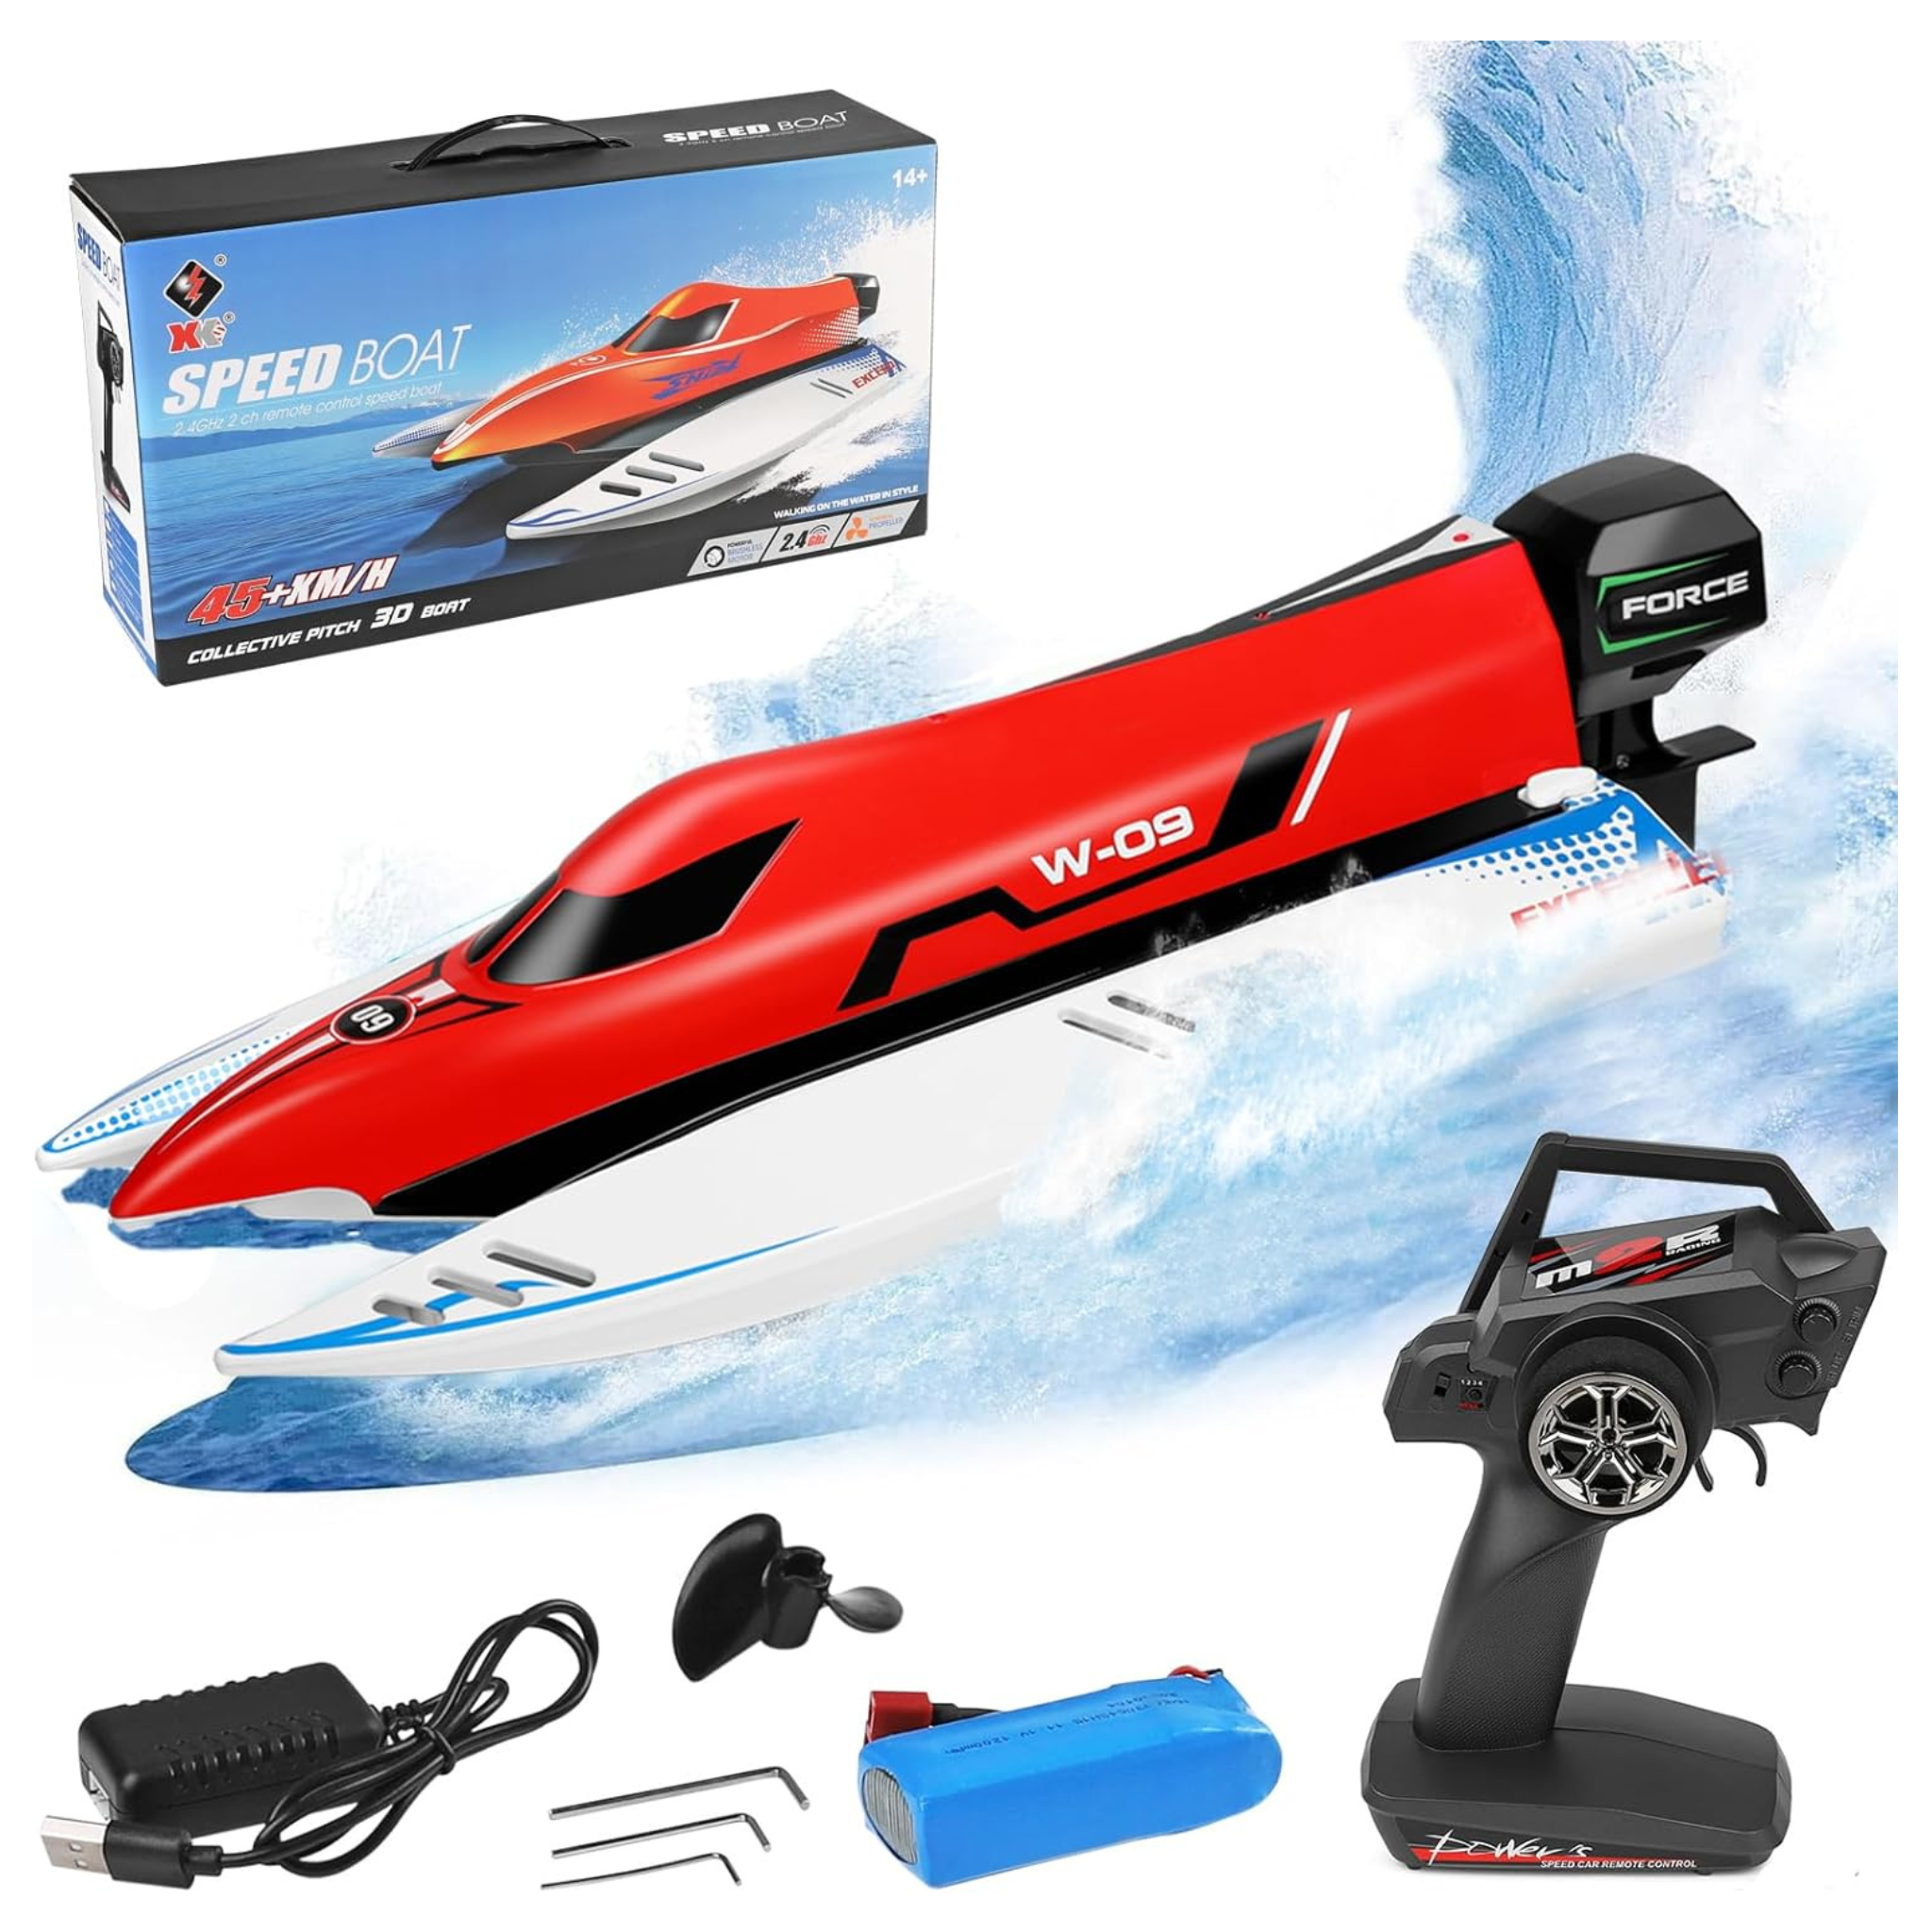 GoolRC Brushless 2.4GHz 45KM/H High Speed Remote Control Boat